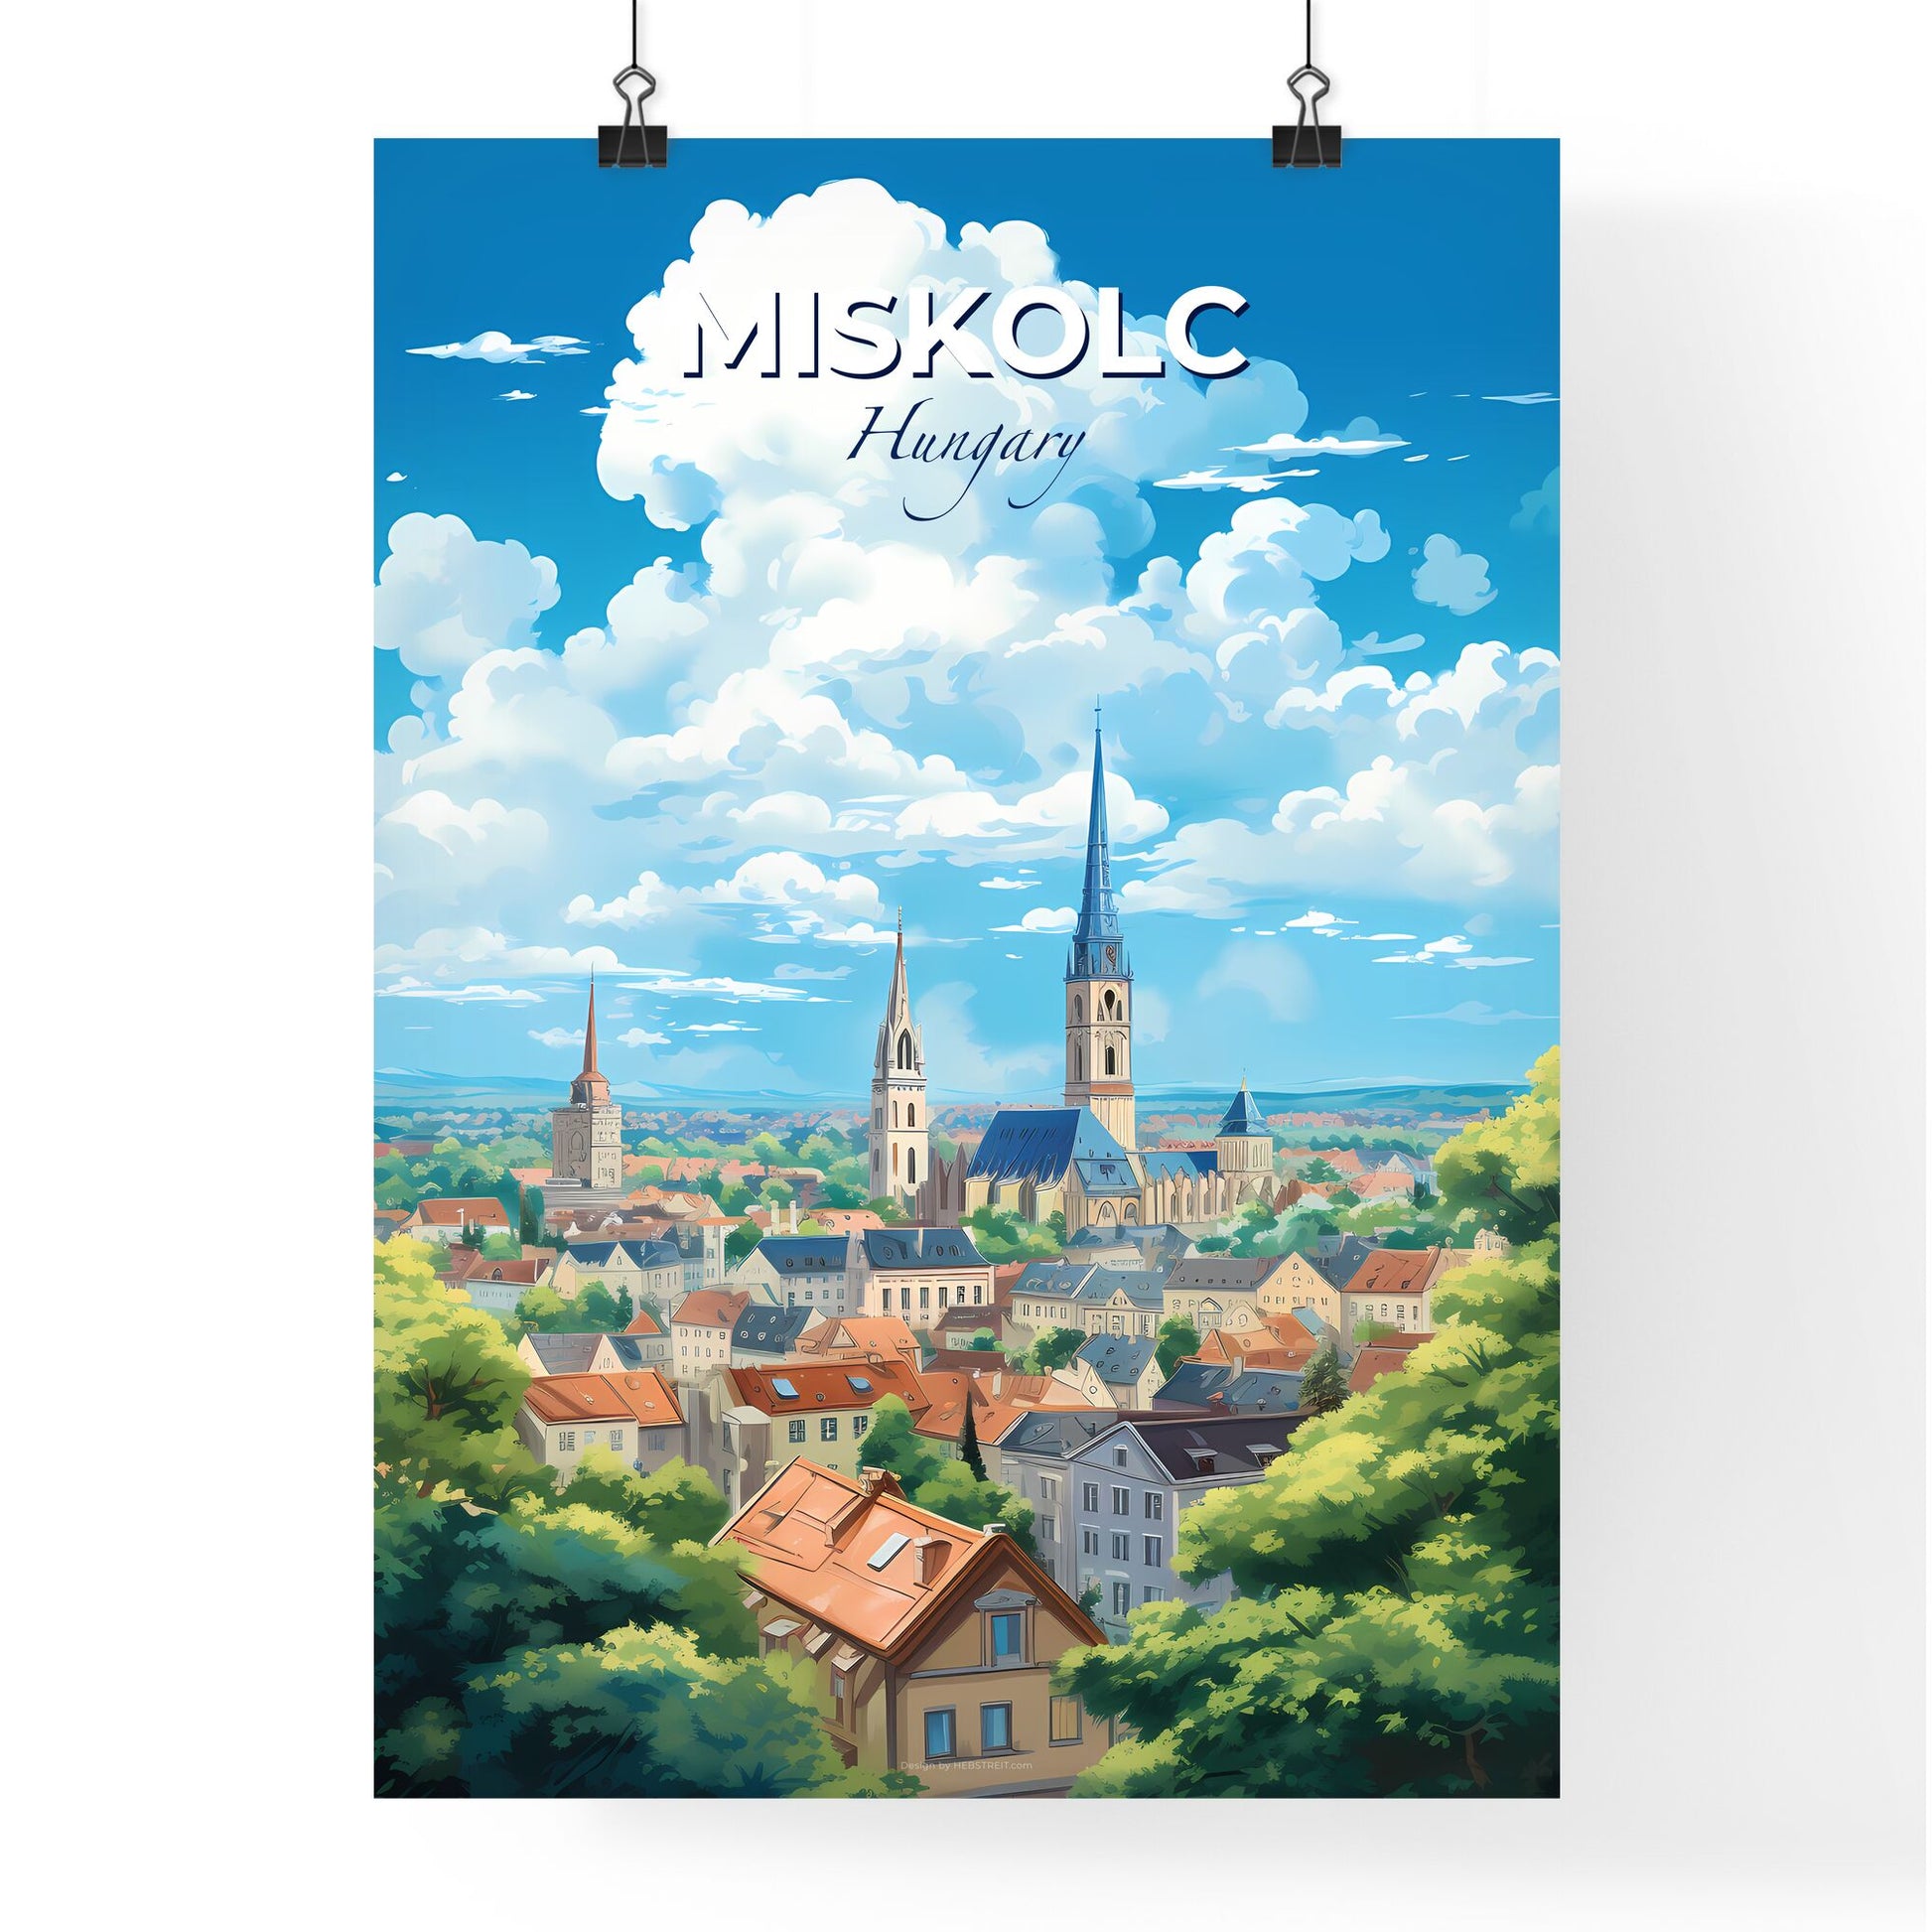 Miskolc Hungary Skyline - A City With Many Towers And Trees - Customizable Travel Gift Default Title